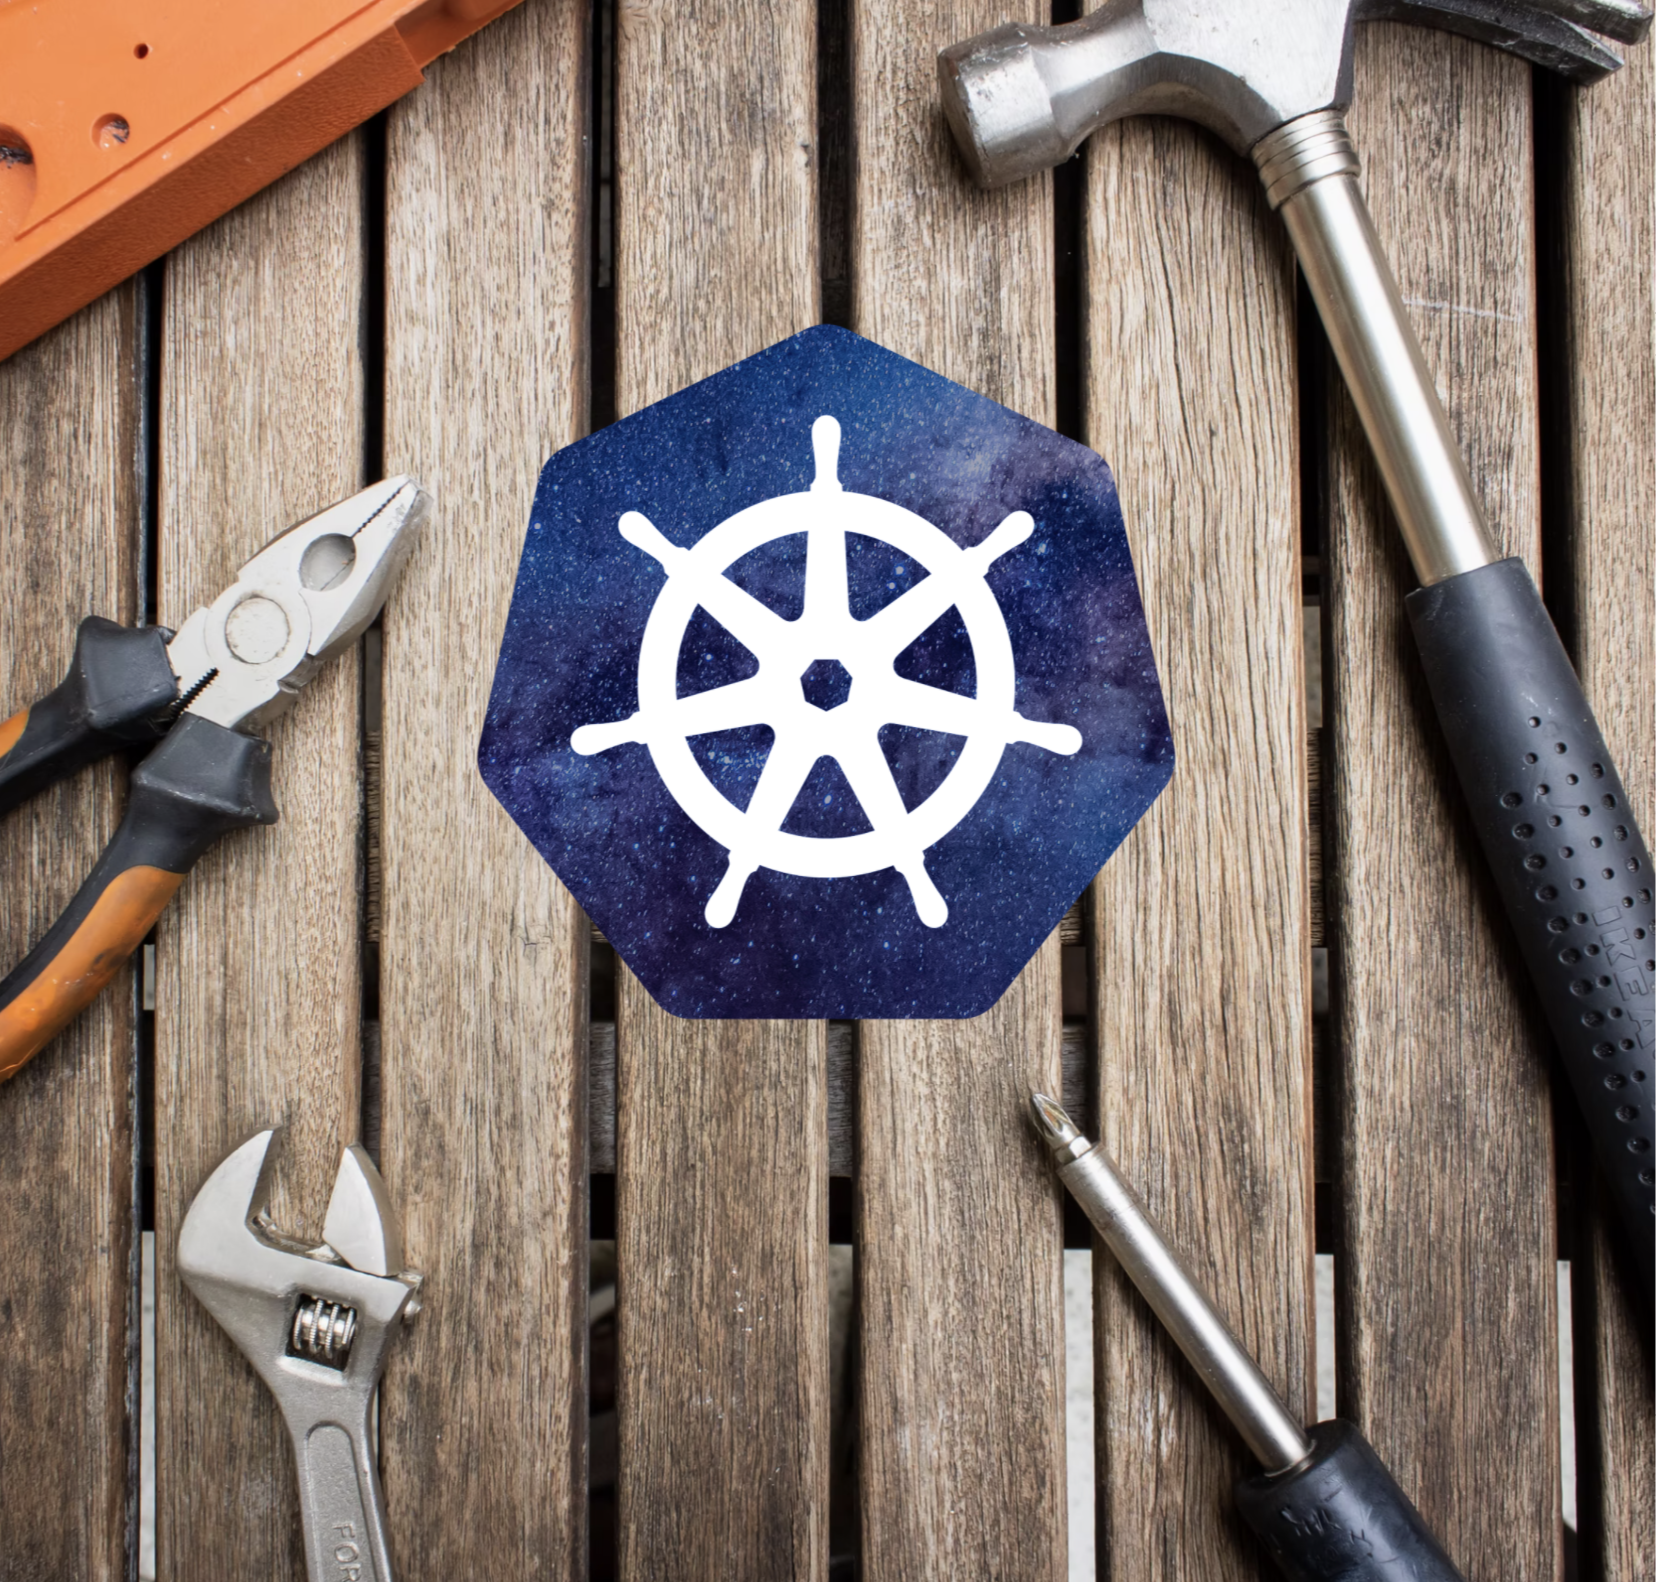 Top Kubernetes Tools You Need for 2021 – K3d and Portainer